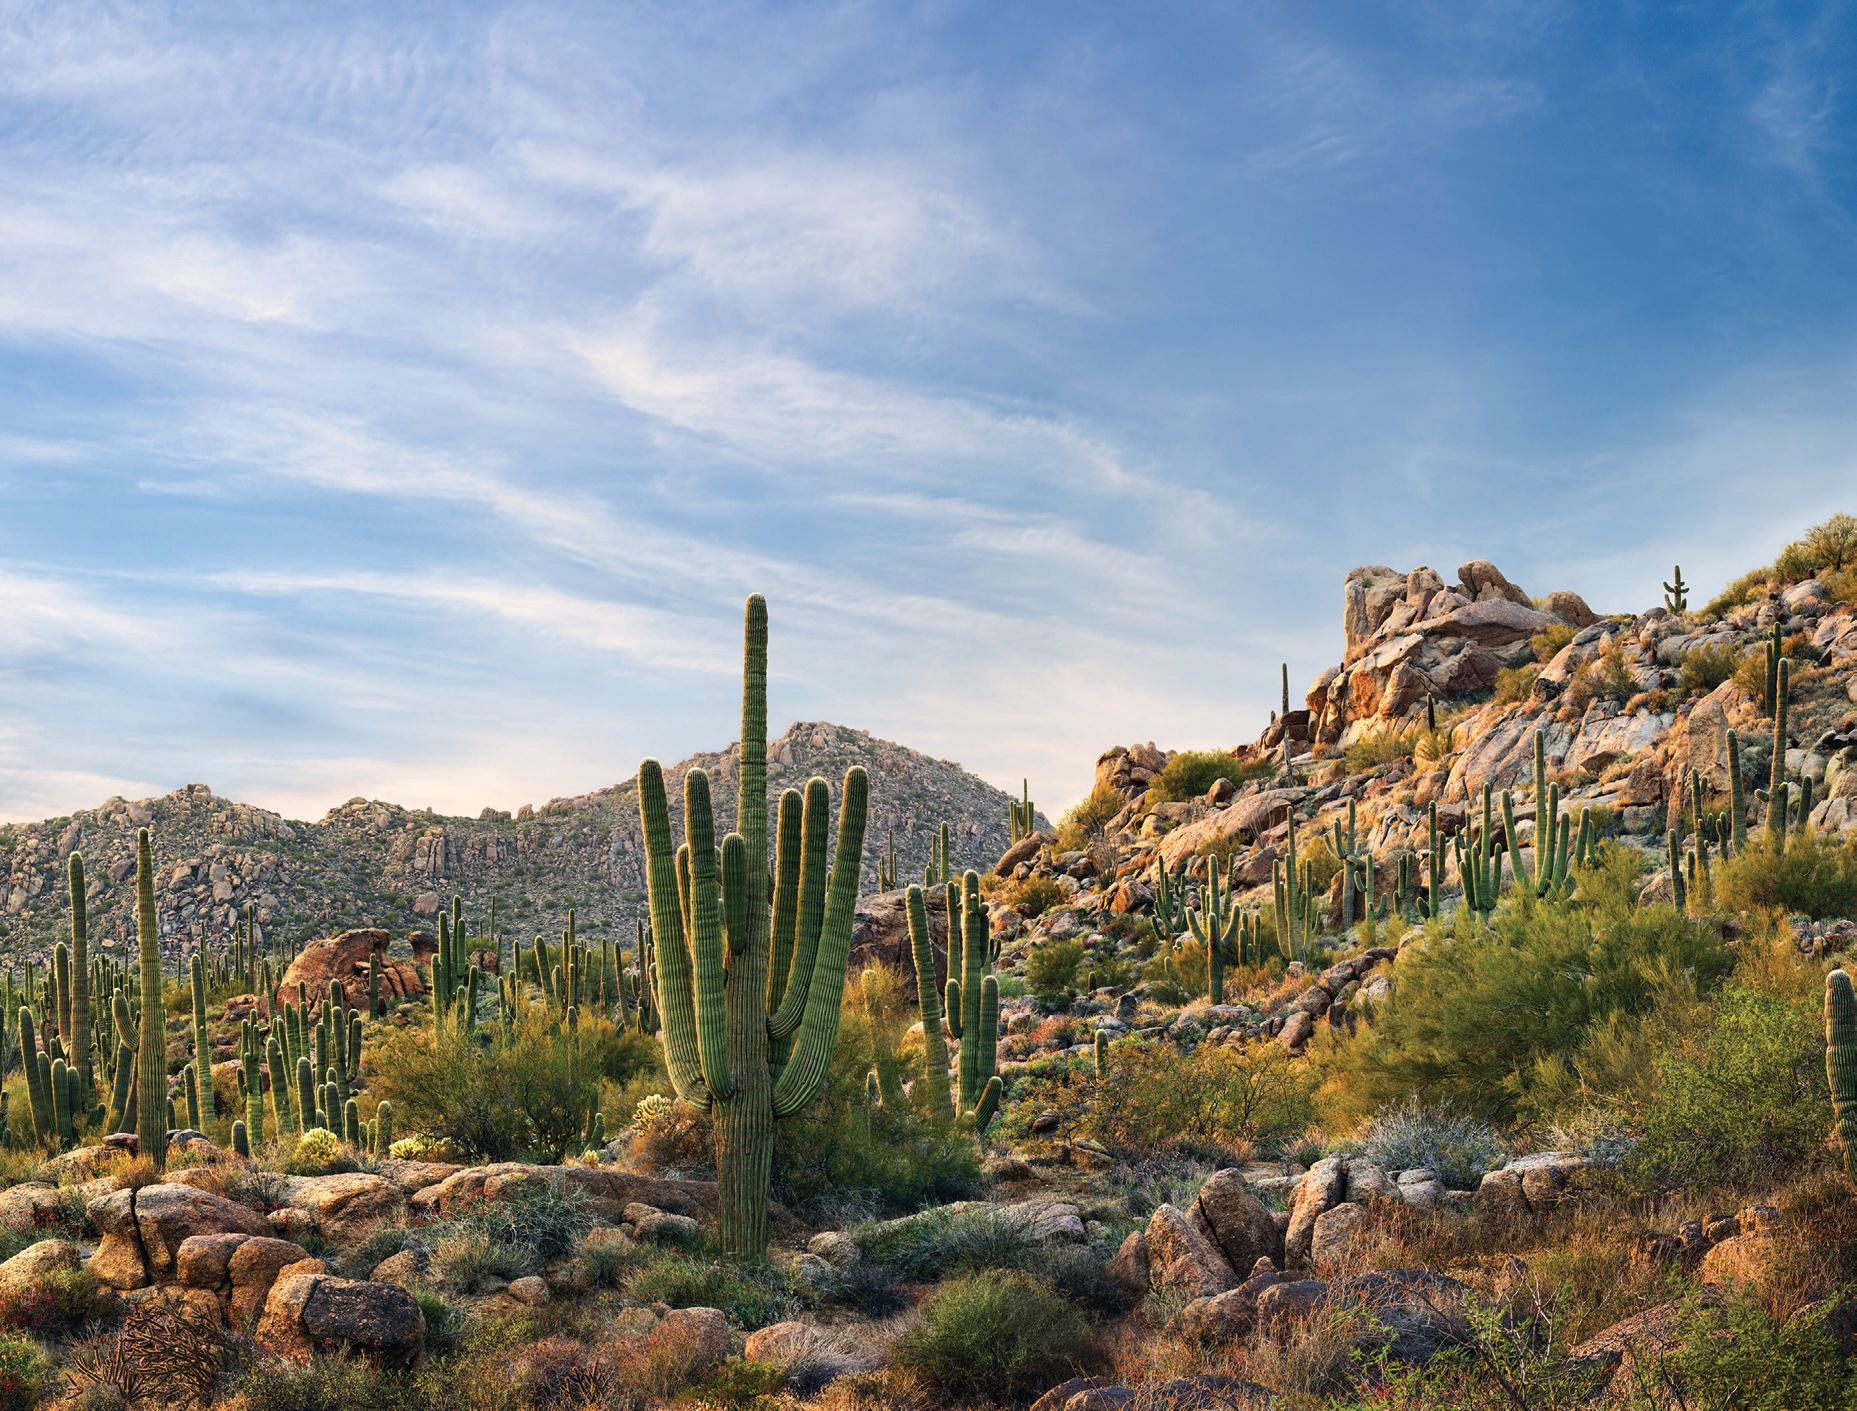 Scottsdale’s McDowell Sonoran Preserve at sunrise. PHOTO BY LONNA TUCKER/COURTESY OF EXPERIENCE SCOTTSDALE